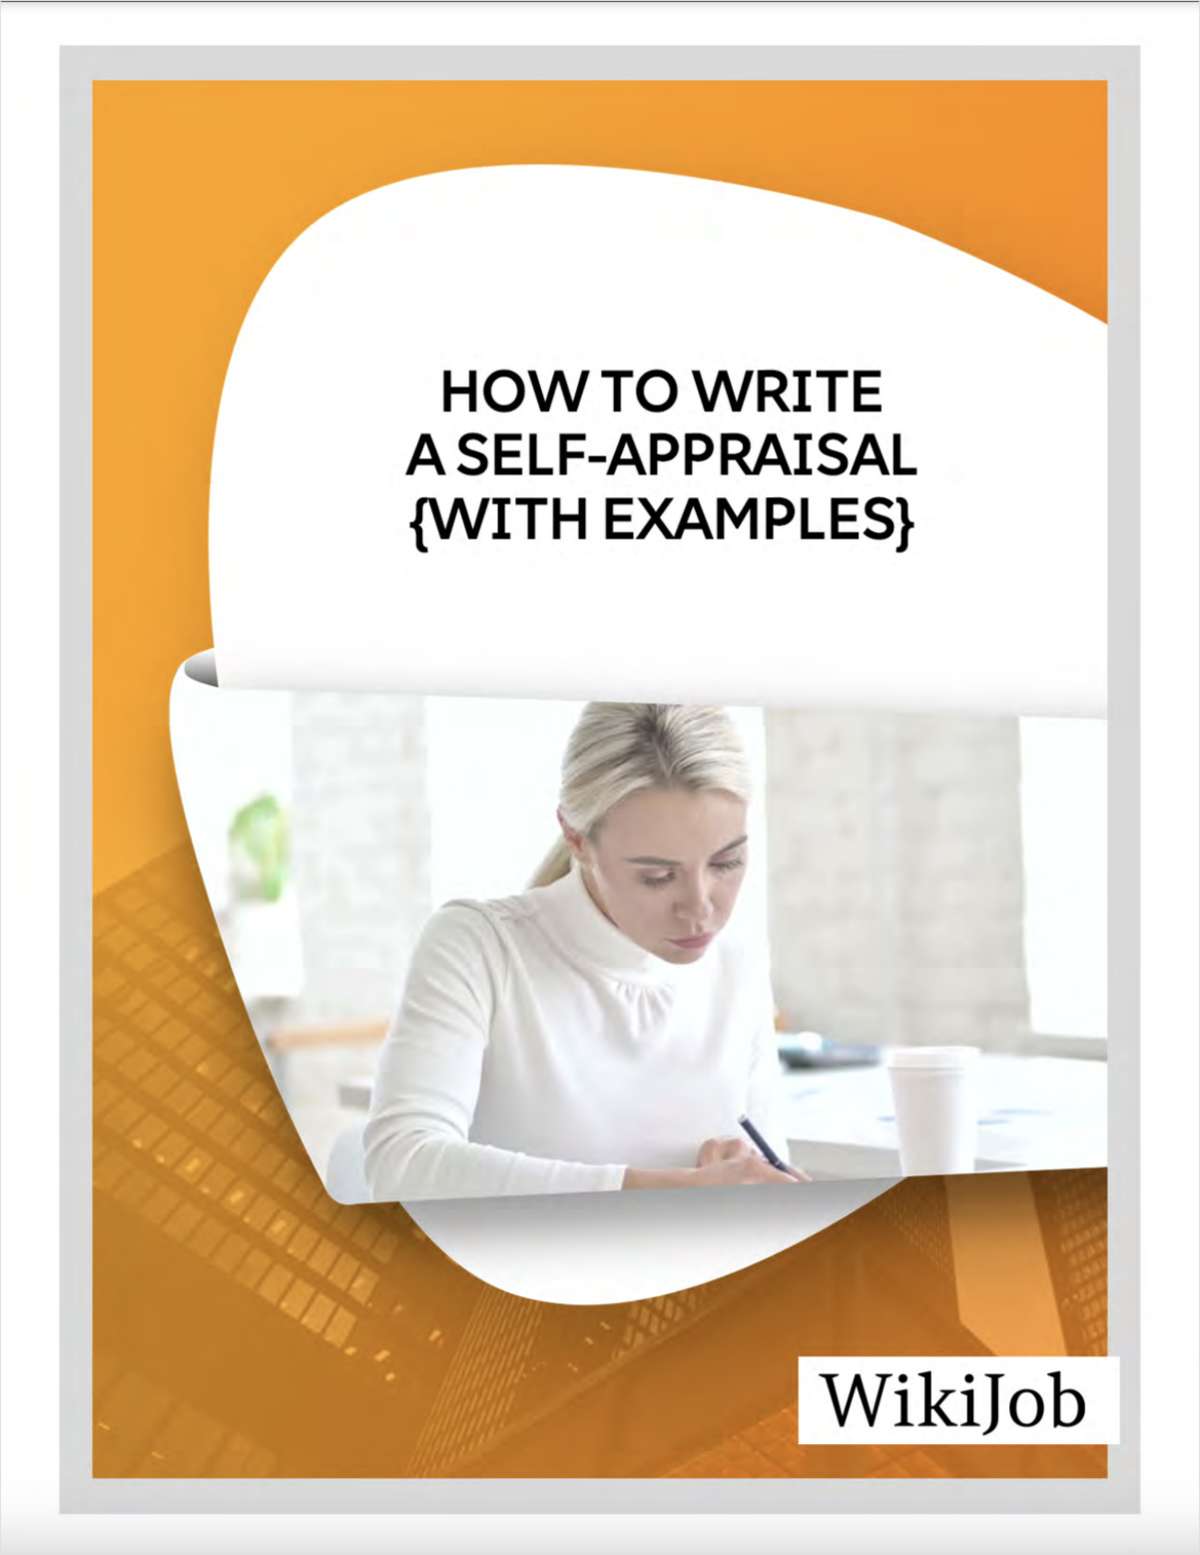 How to Write a Self-Appraisal (With Examples)